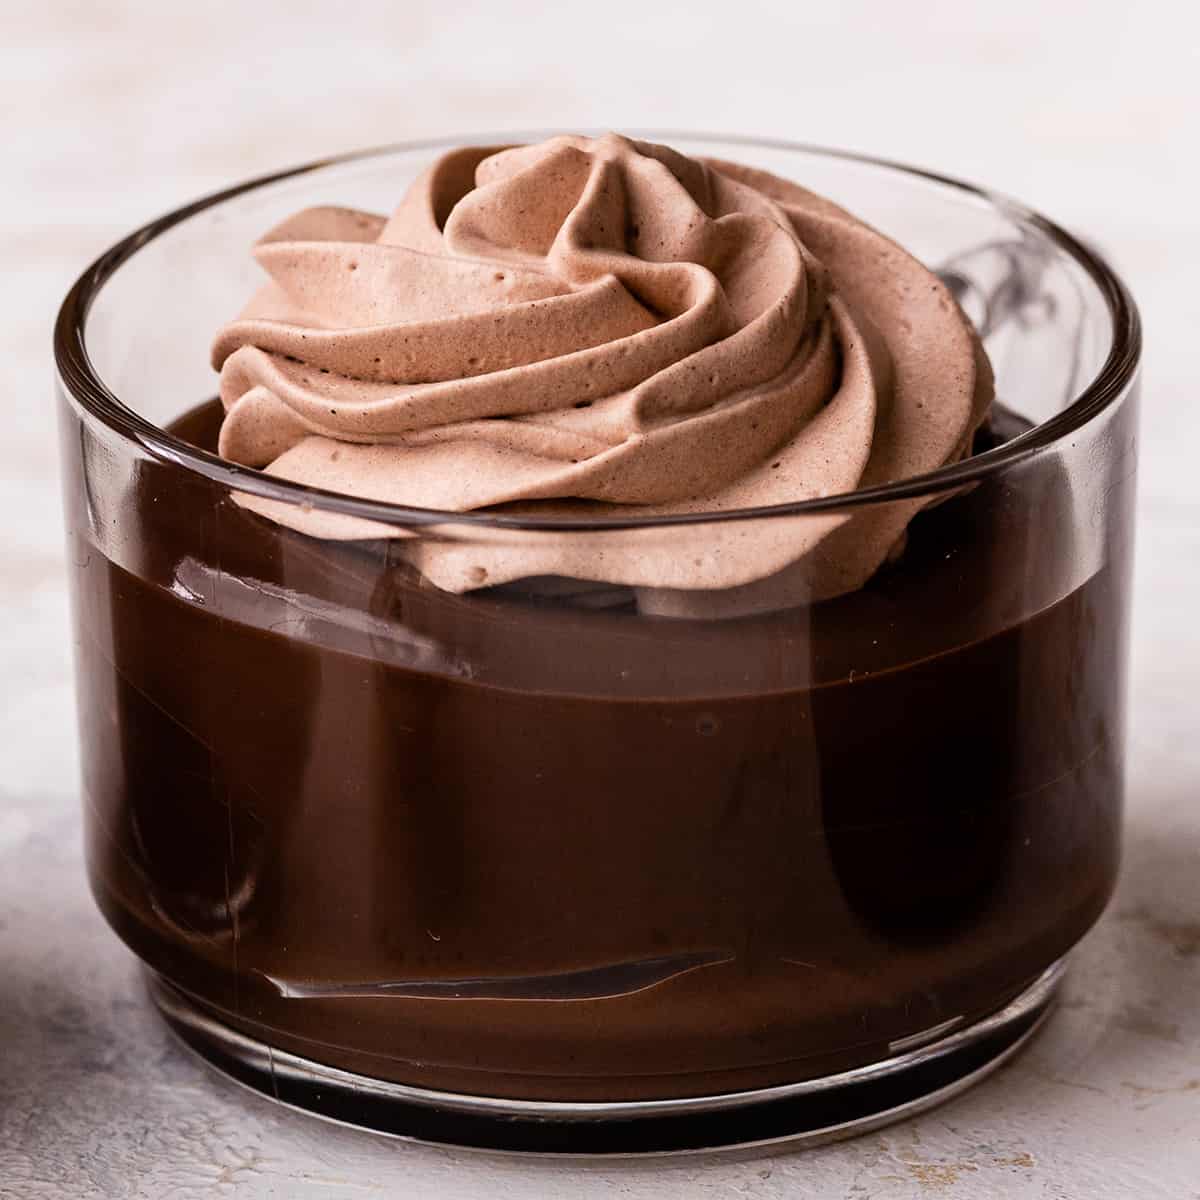 Chocolate Whipped Cream piped onto chocolate pudding in a glass cup